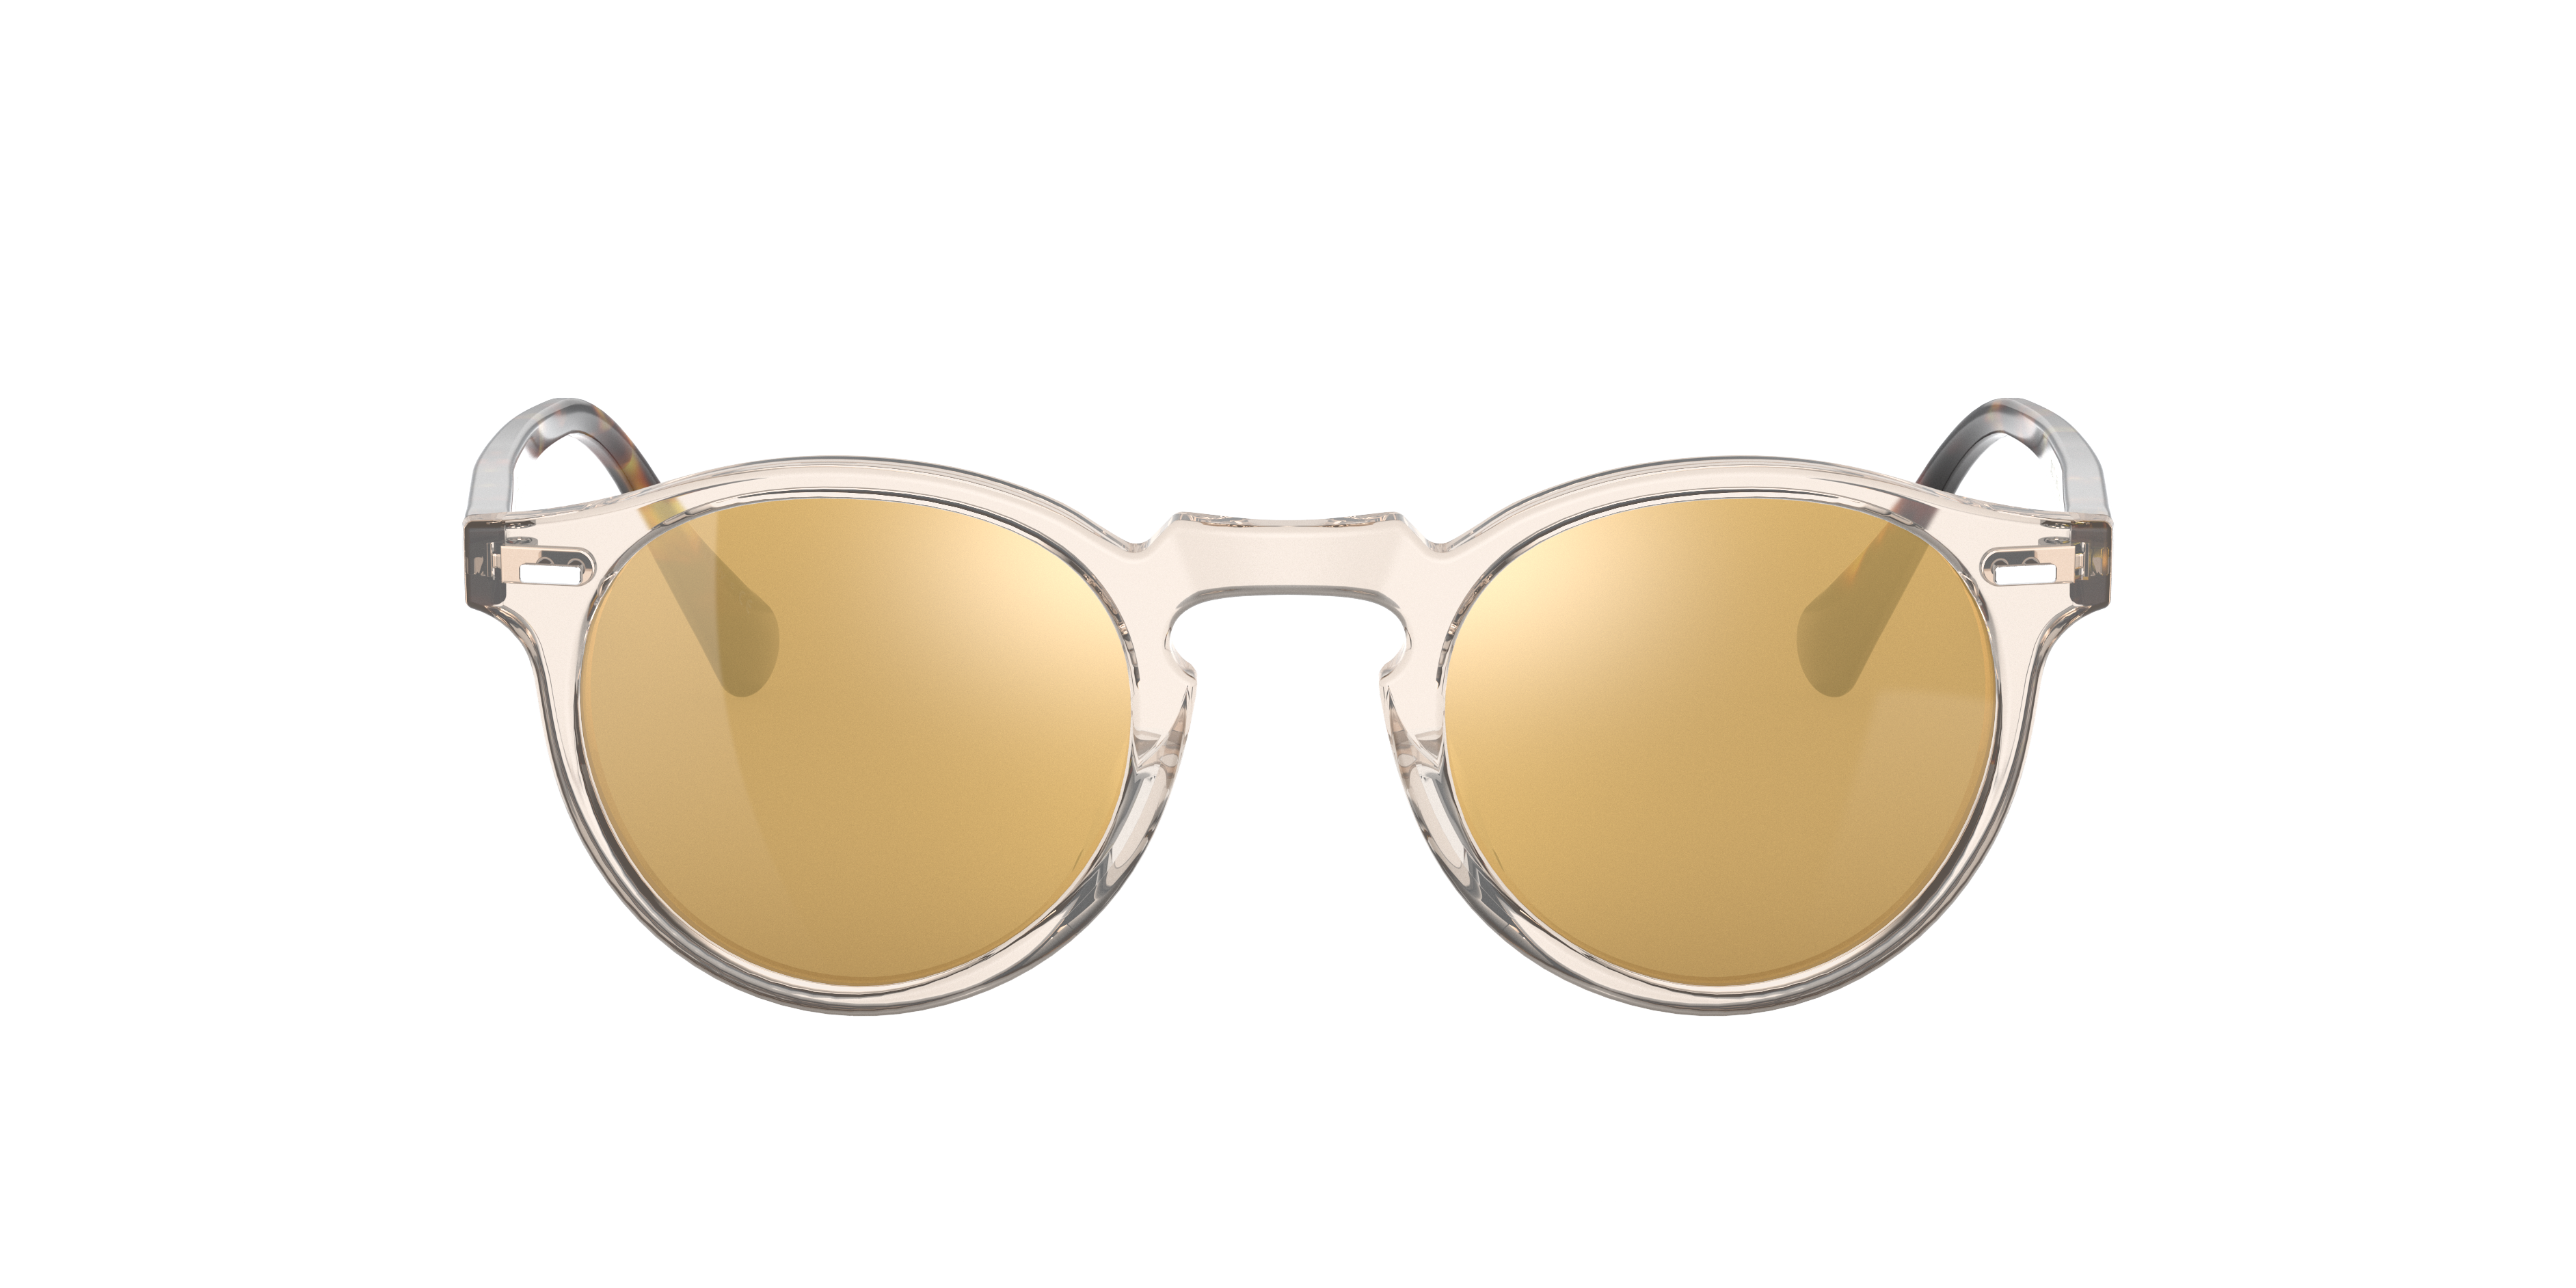 Oliver Peoples Gregory Peck Sun